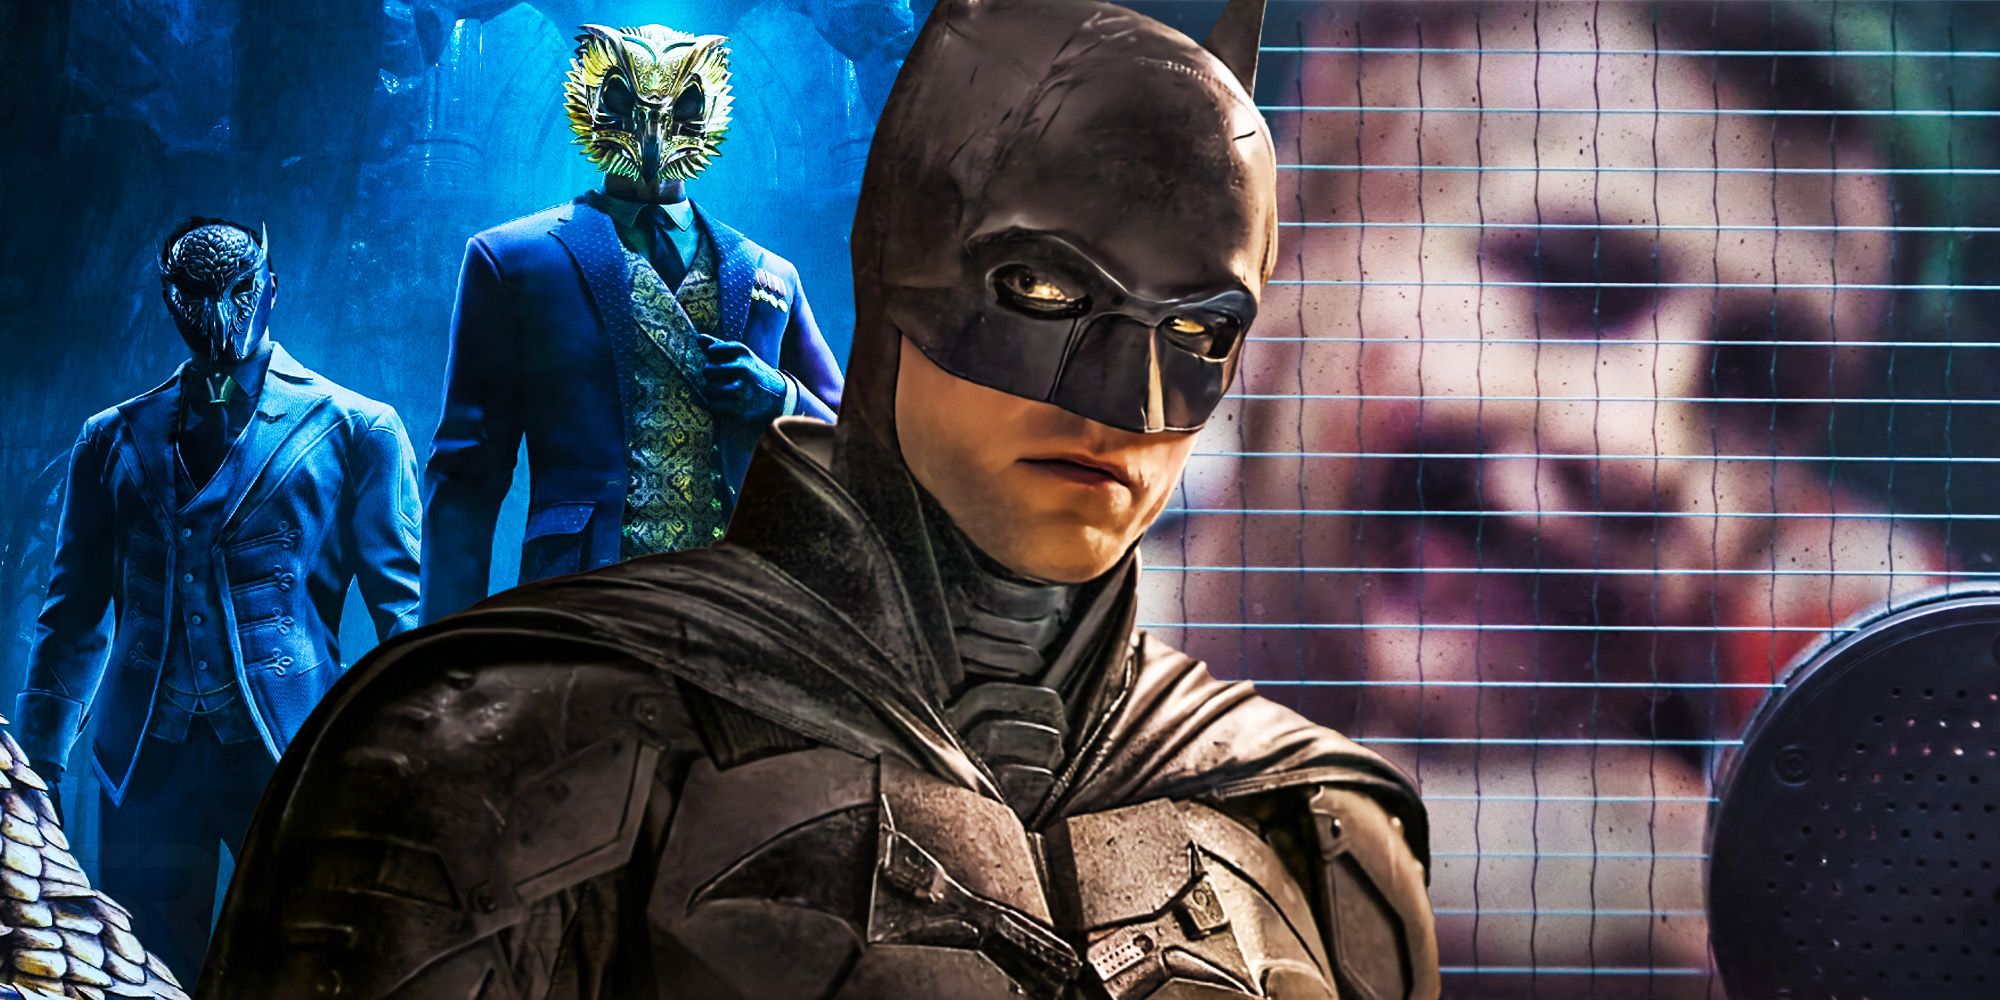 Who Is The Batman 2's Villain? 7 Most Likely Possibilities